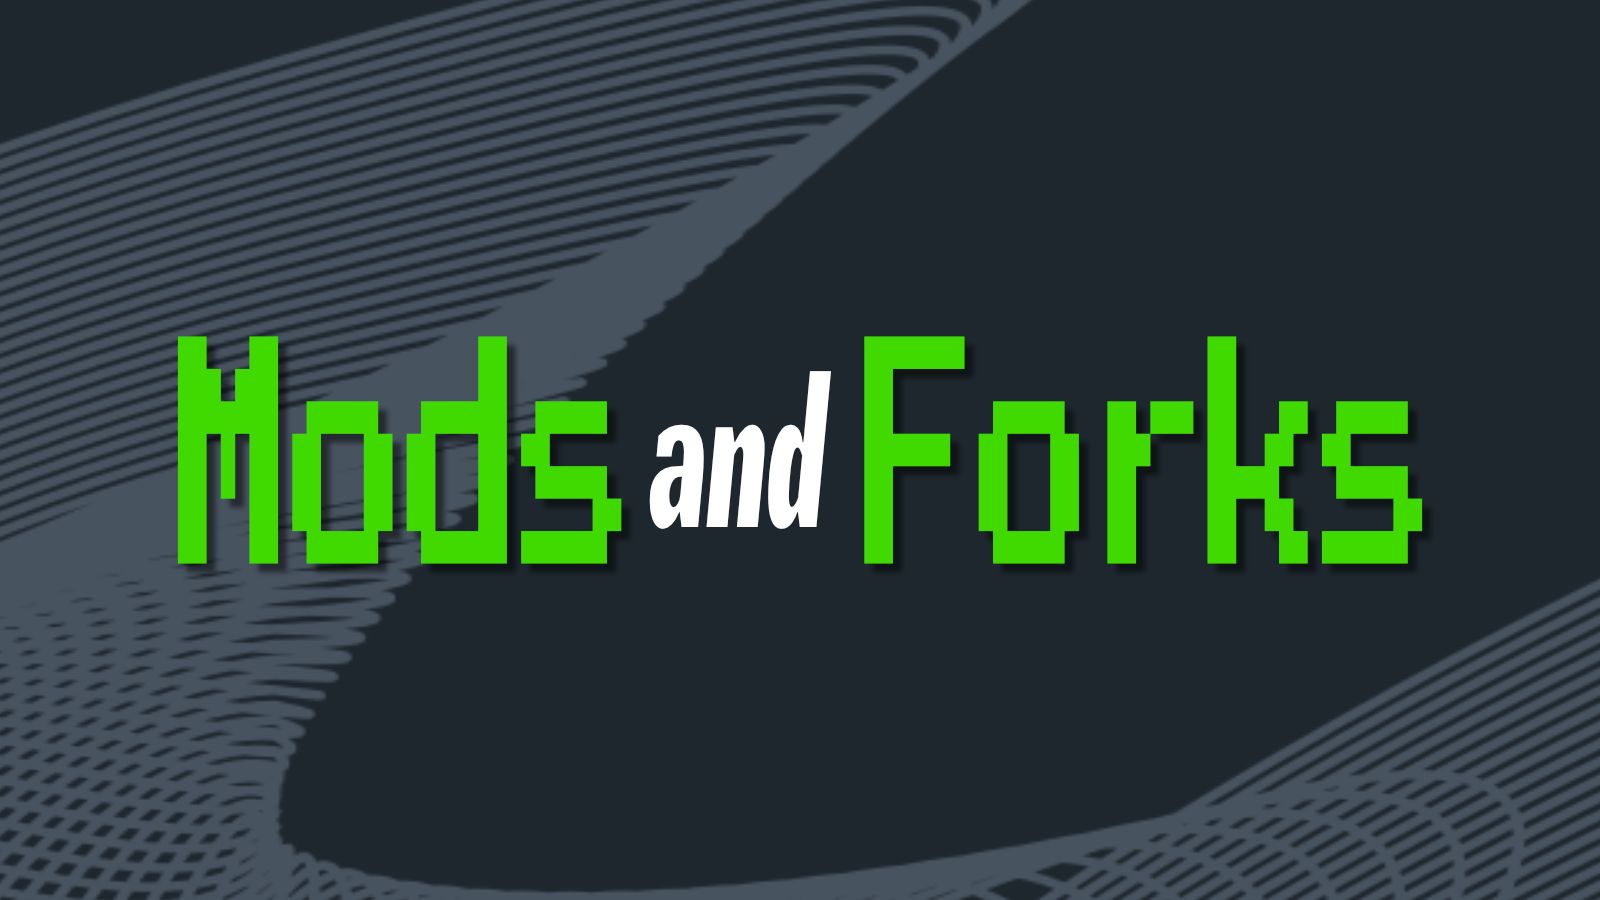 Mods and Forks text over gray and blue background